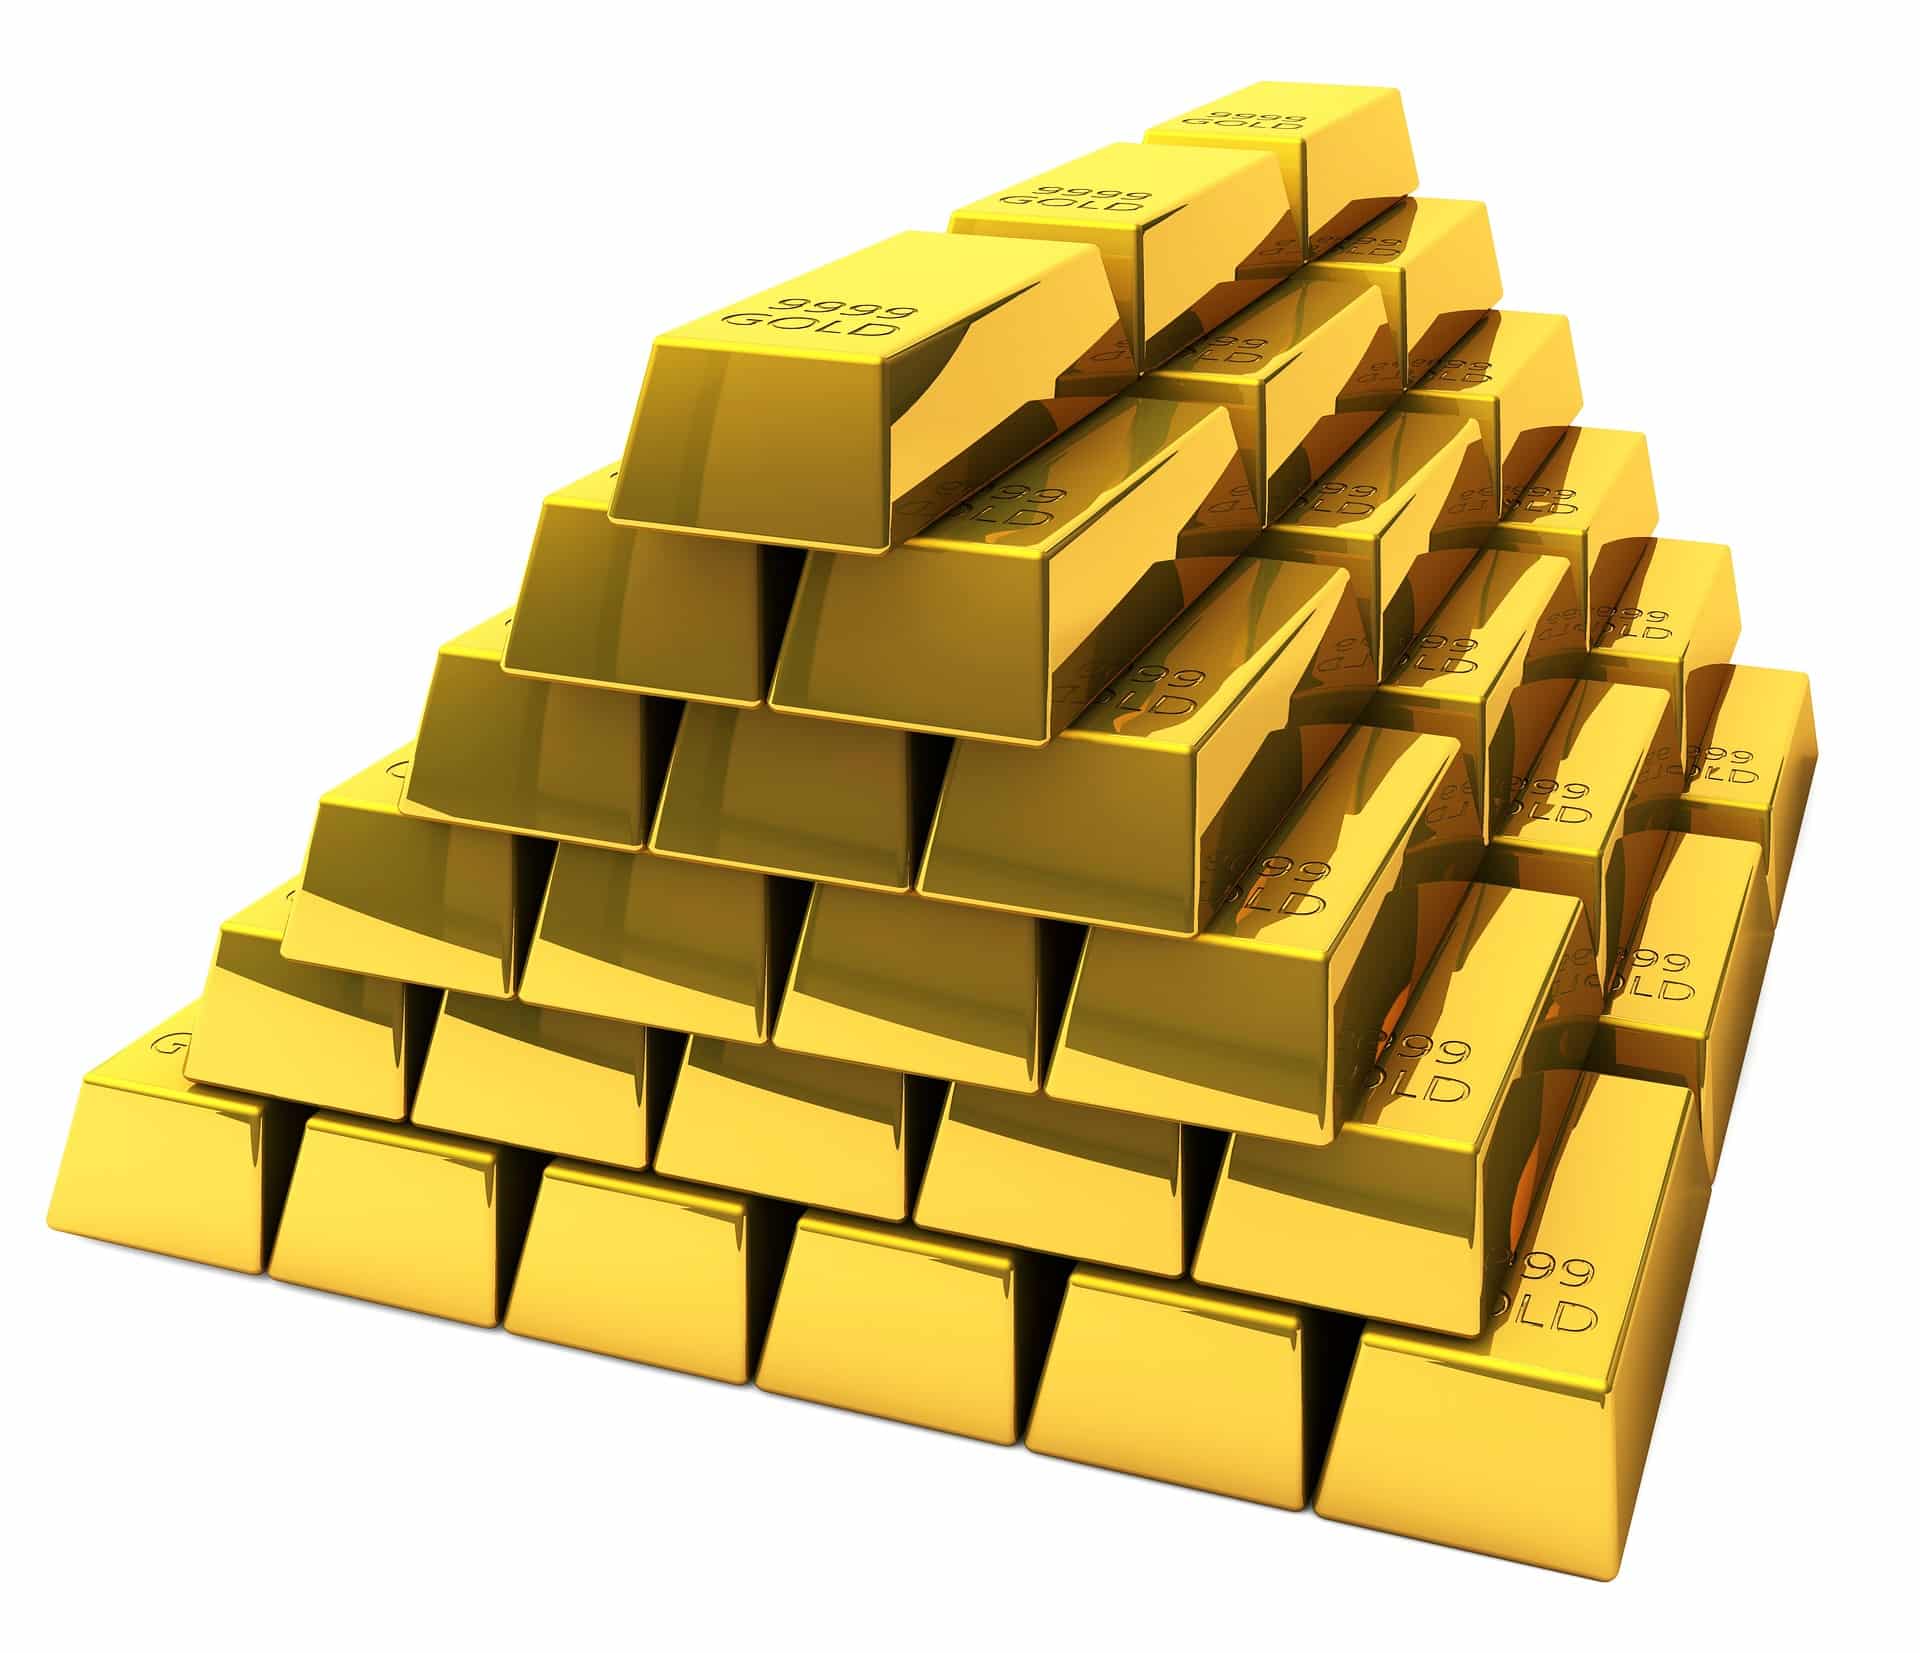 Gold represented in an image.